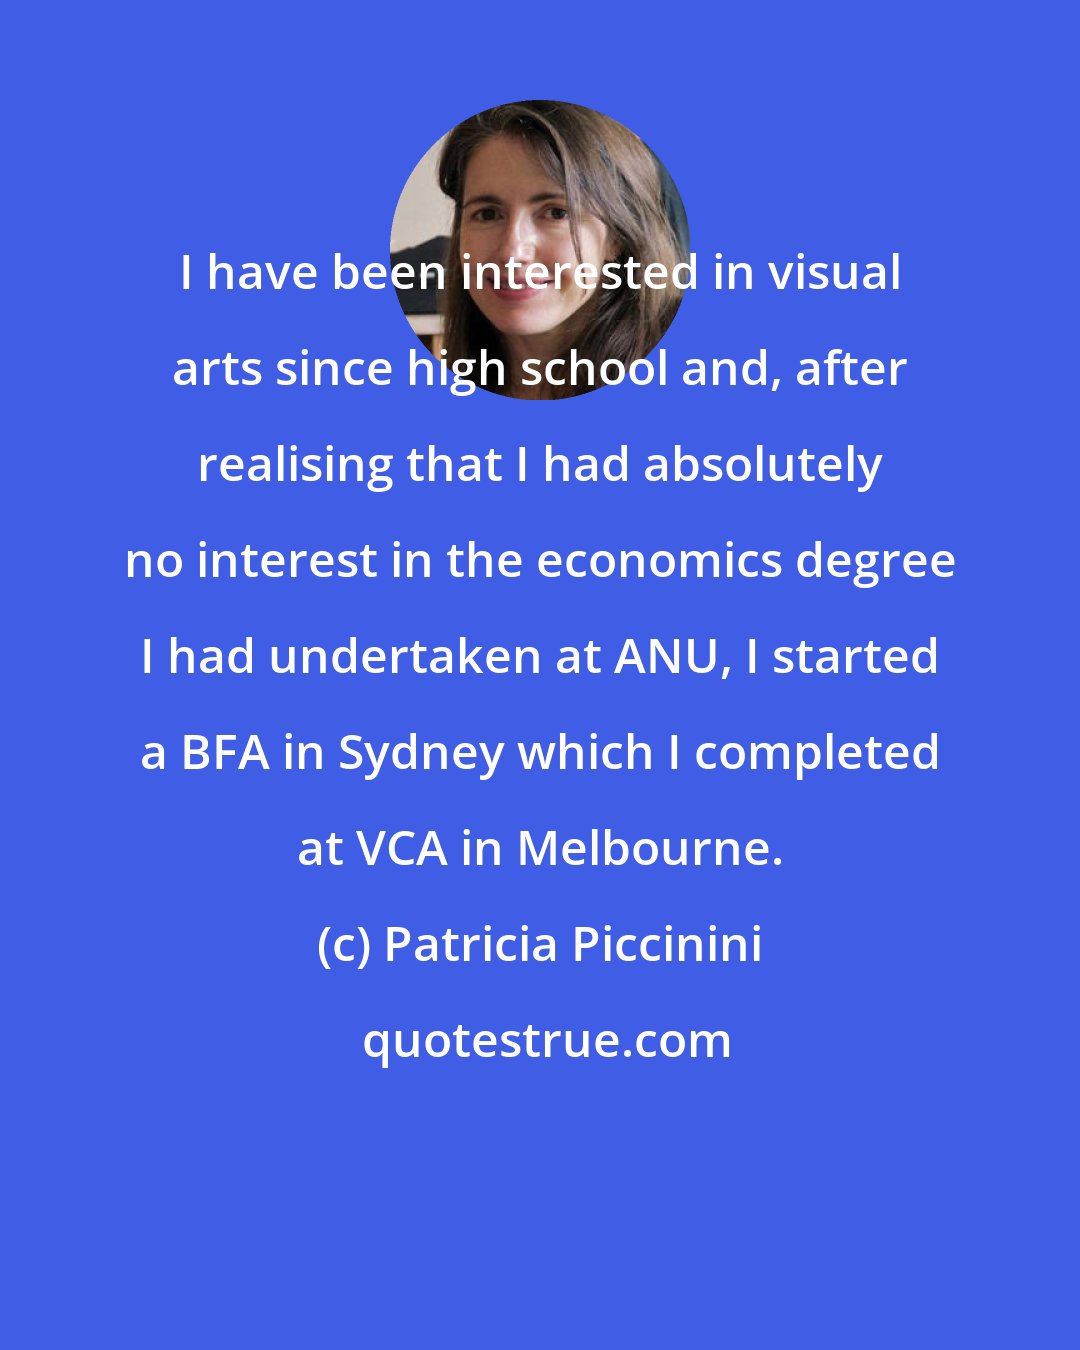 Patricia Piccinini: I have been interested in visual arts since high school and, after realising that I had absolutely no interest in the economics degree I had undertaken at ANU, I started a BFA in Sydney which I completed at VCA in Melbourne.